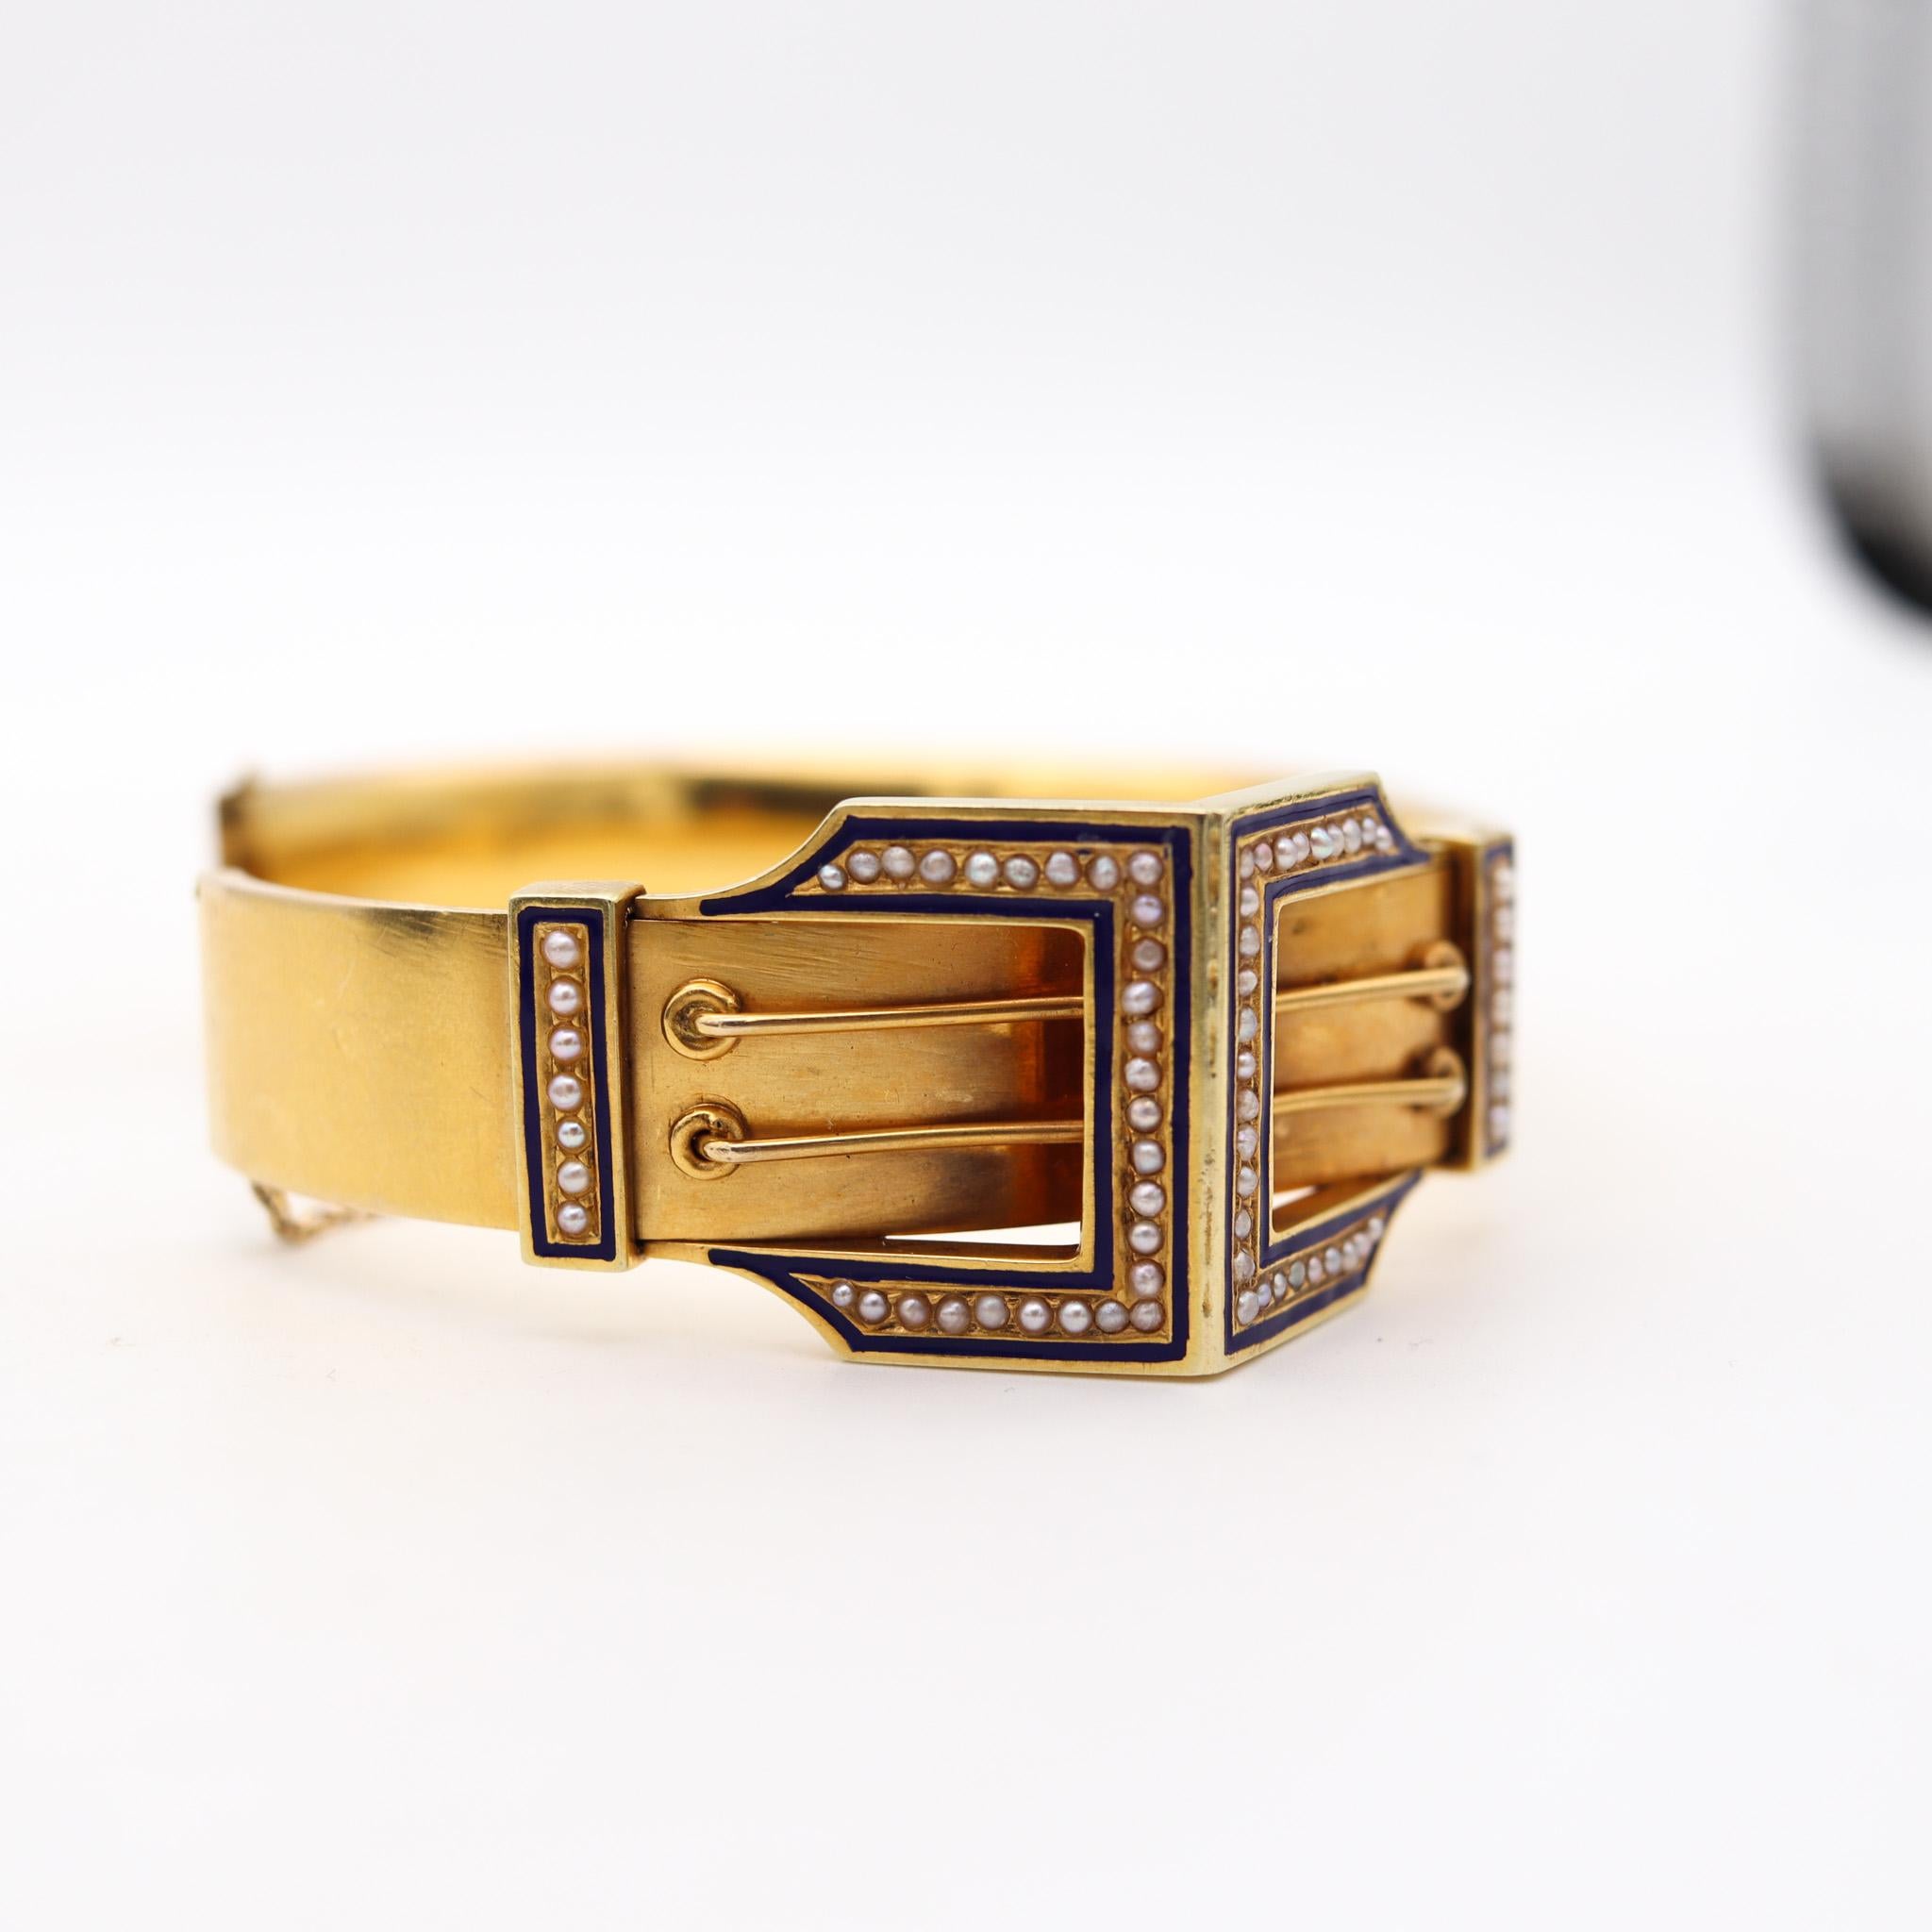 Victorian 1870 Etruscan Revival Geometric Bracelet In 16K With Enamel And Pearls For Sale 1